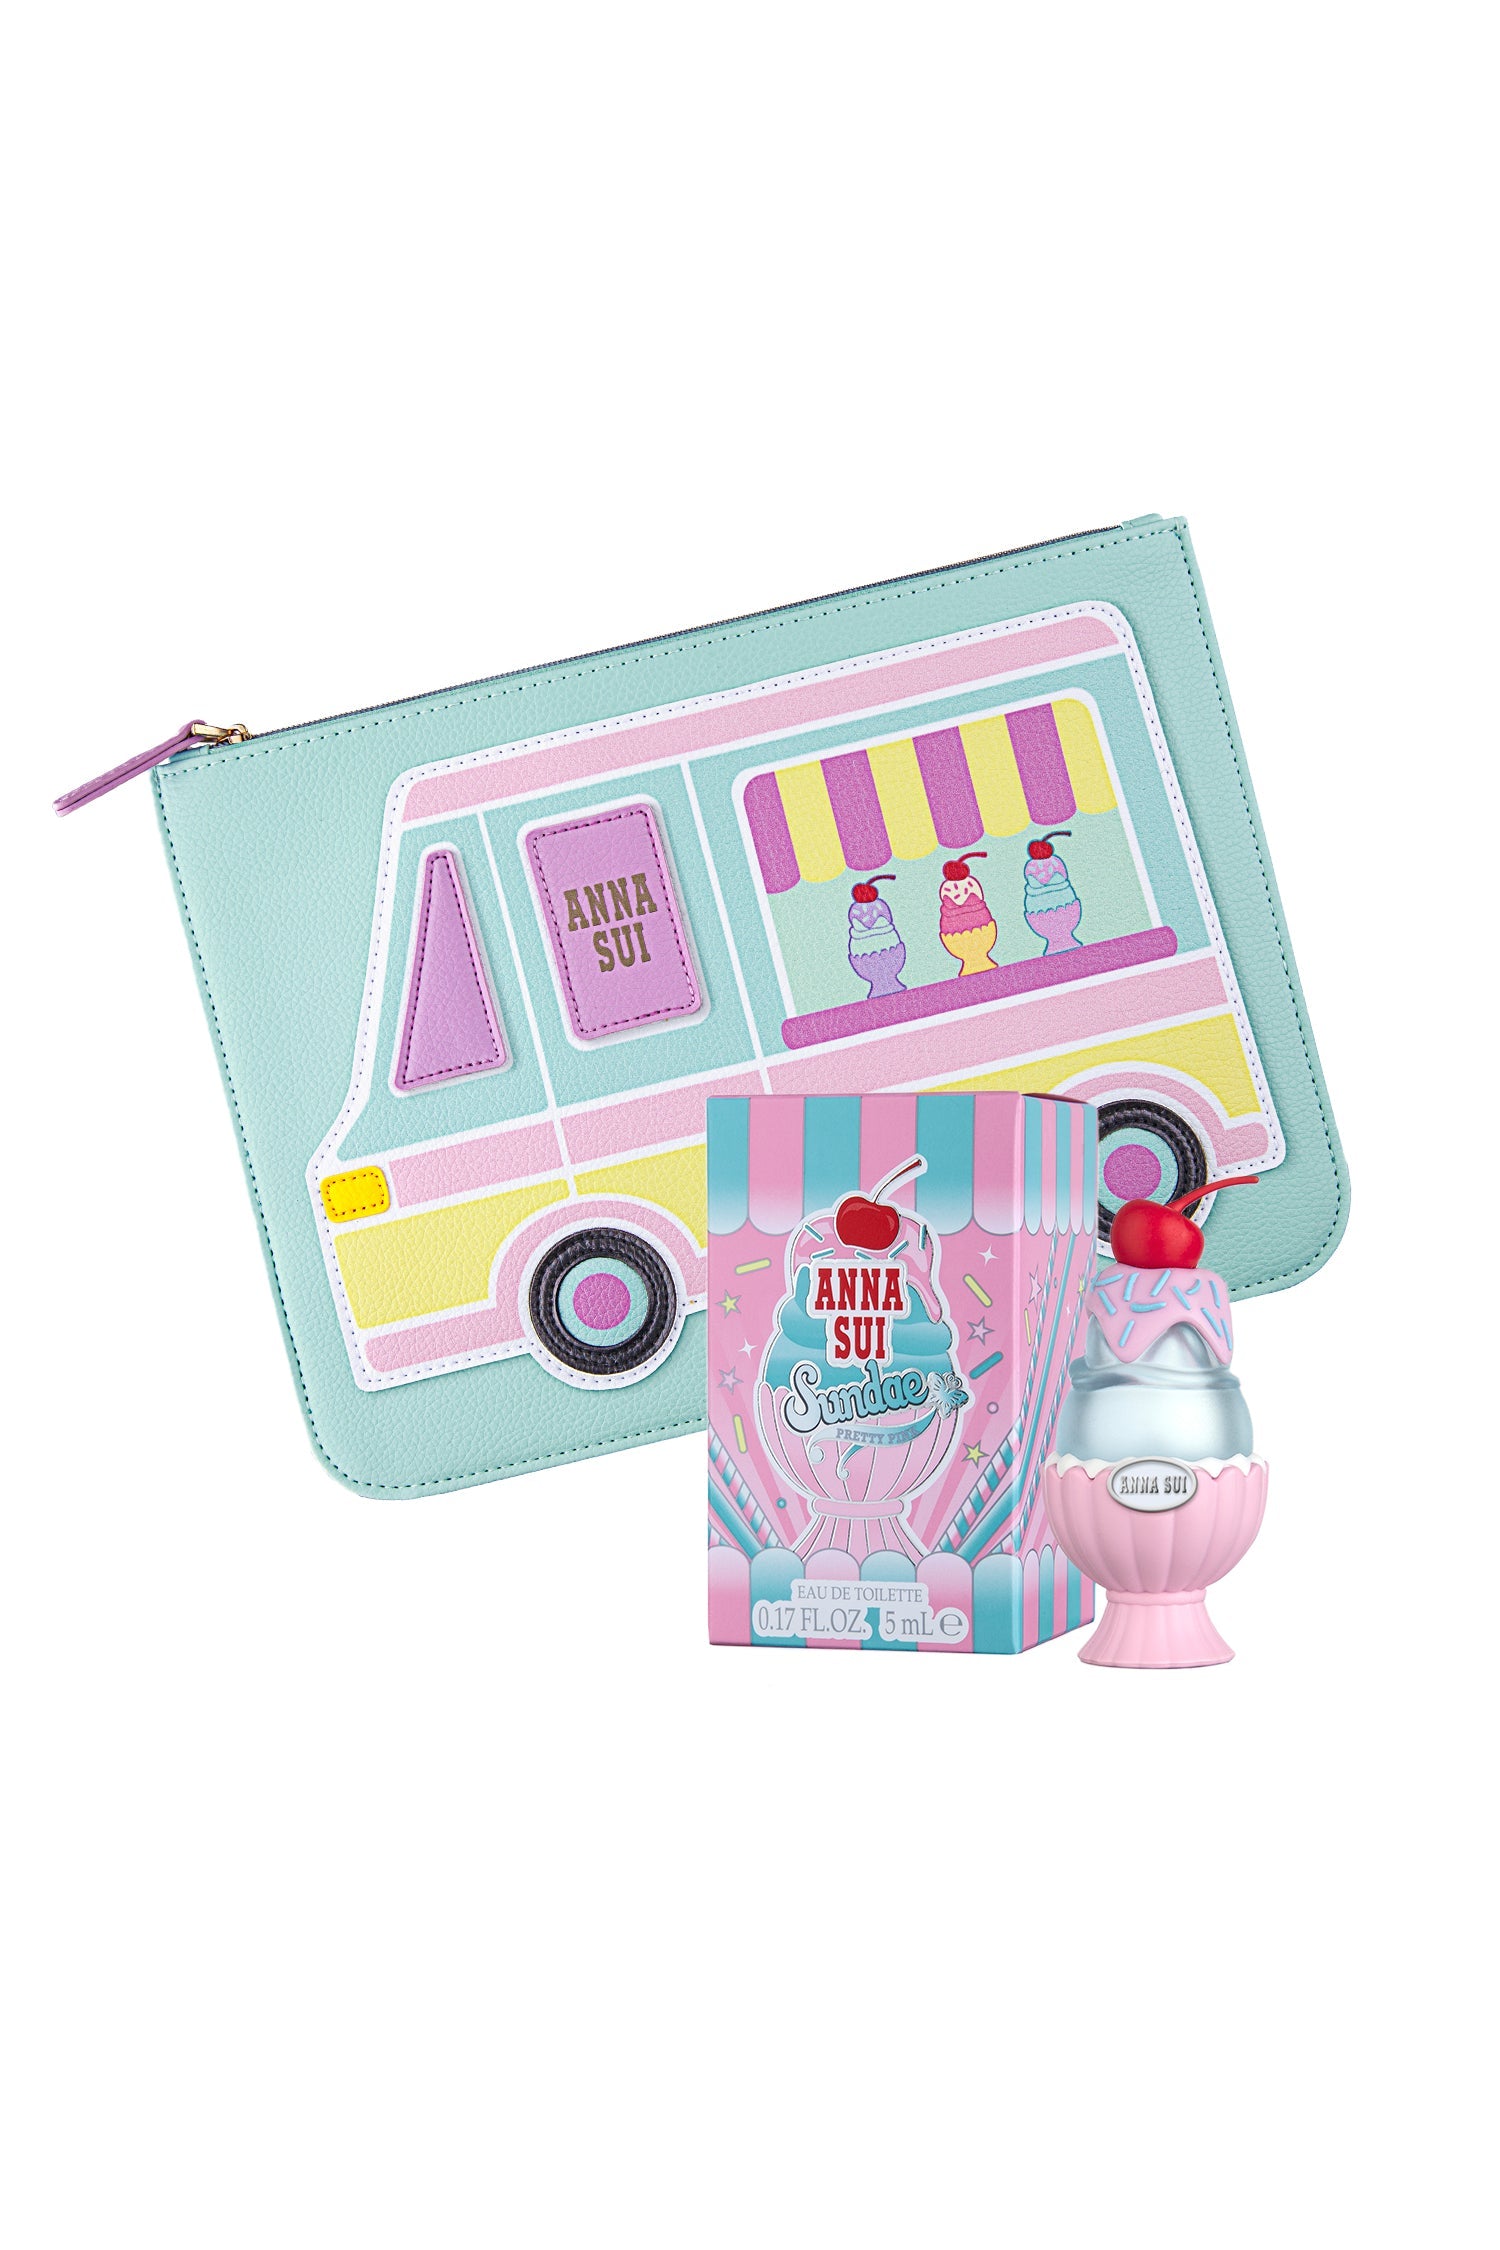 FREE Sundae Pretty Pink &Pouch Set with SALE Purchase – Anna Sui